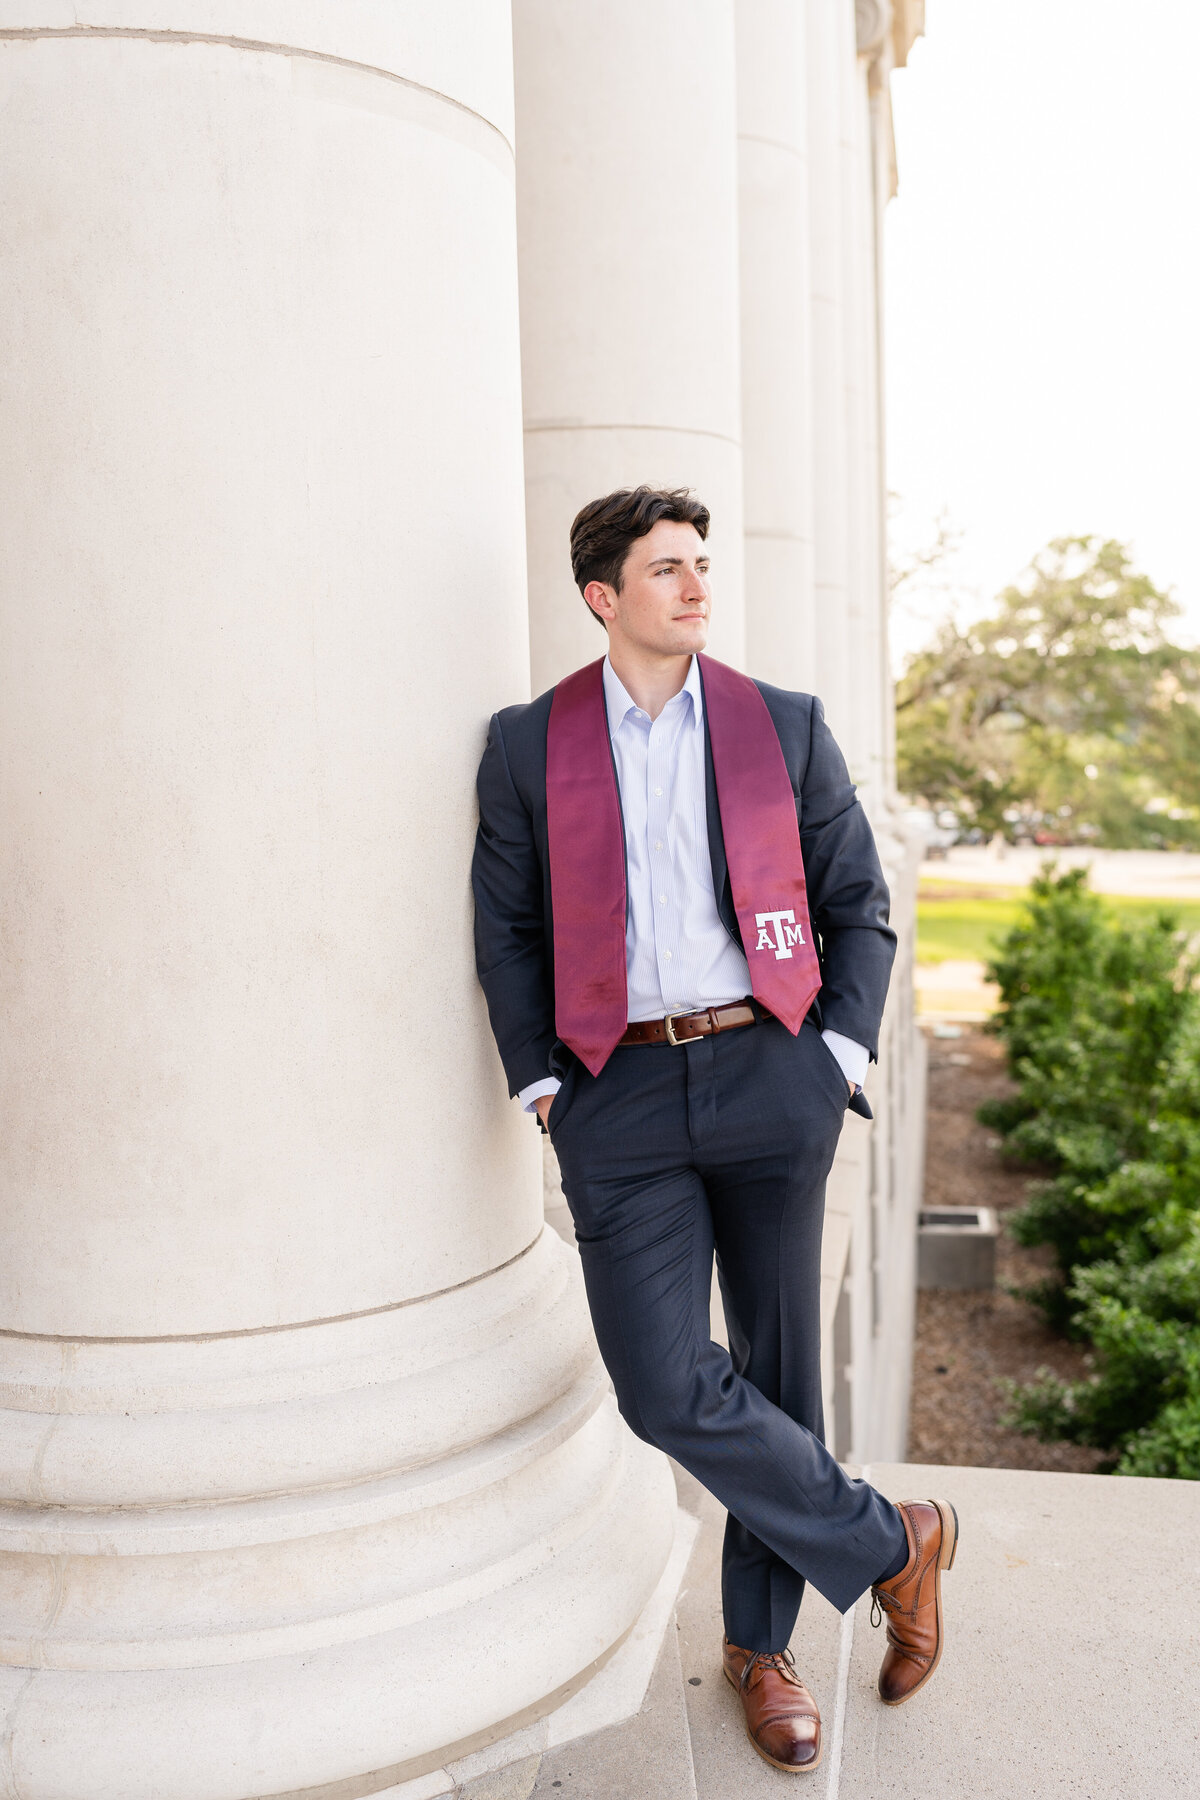 Texas A&M senior guy wearing a suit and Aggie stole with hands in pockets, leaning on a column and looking away at the Administration Building